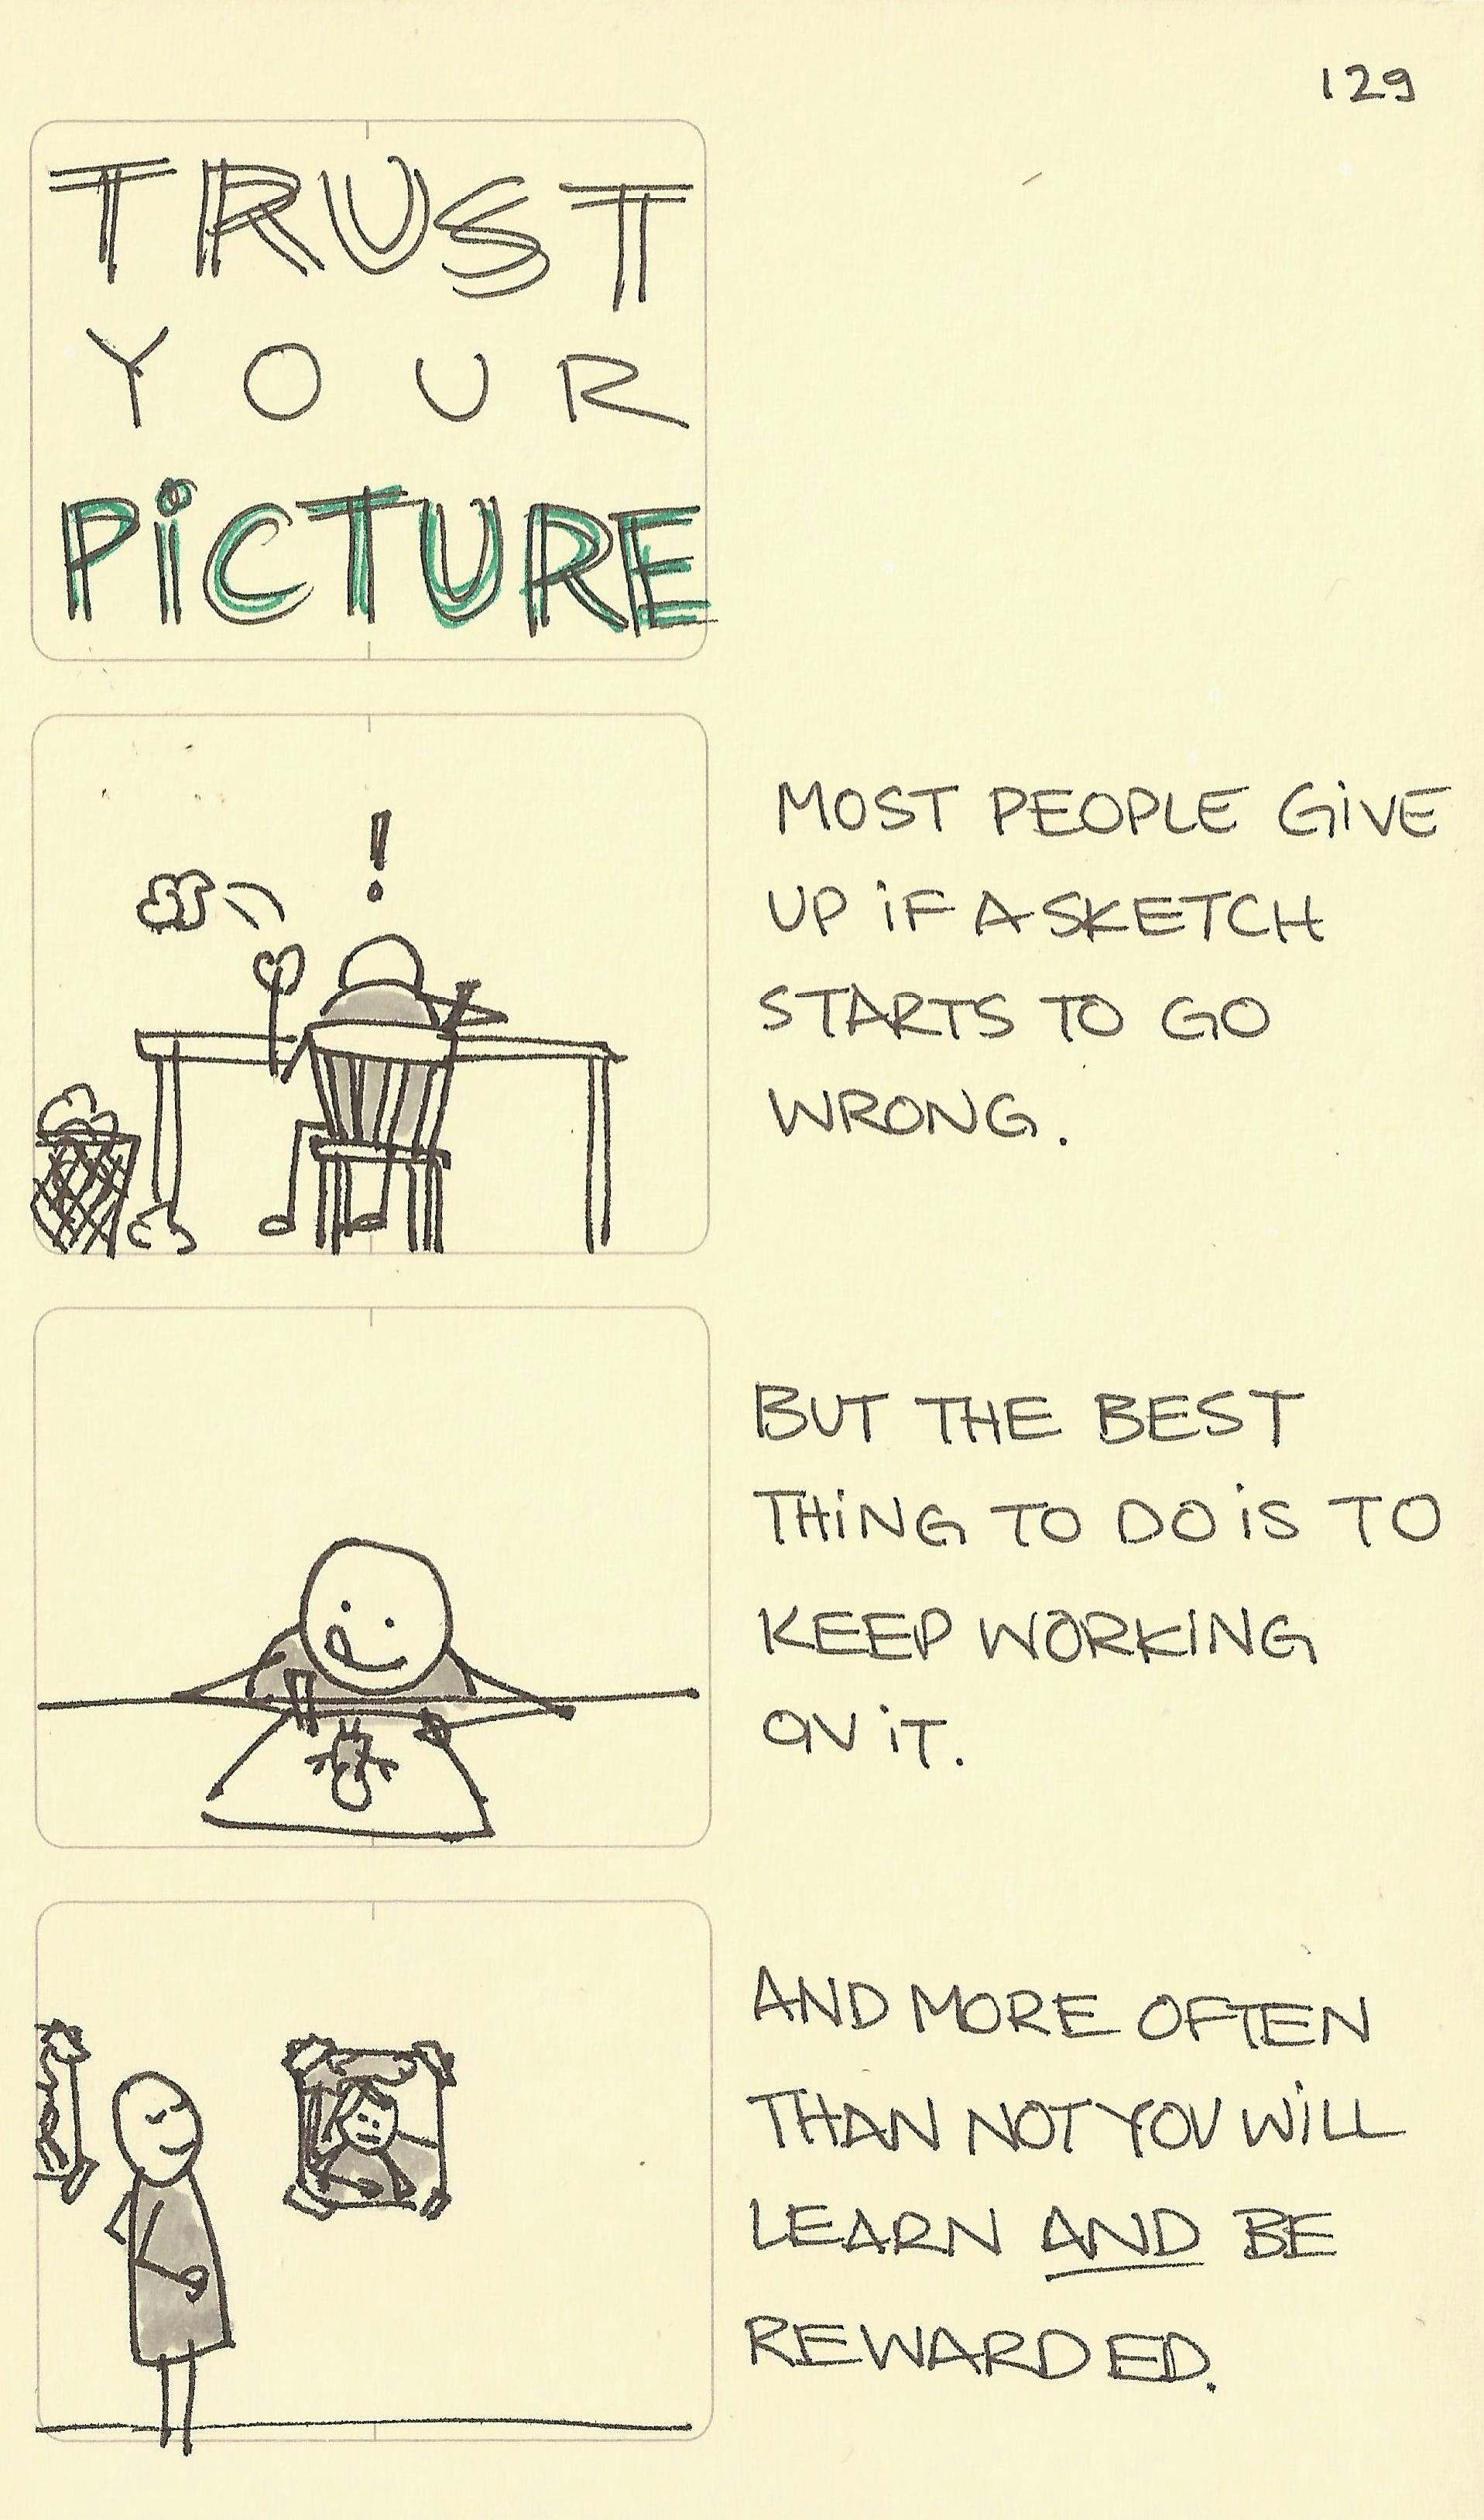 Trust your picture - Sketchplanations